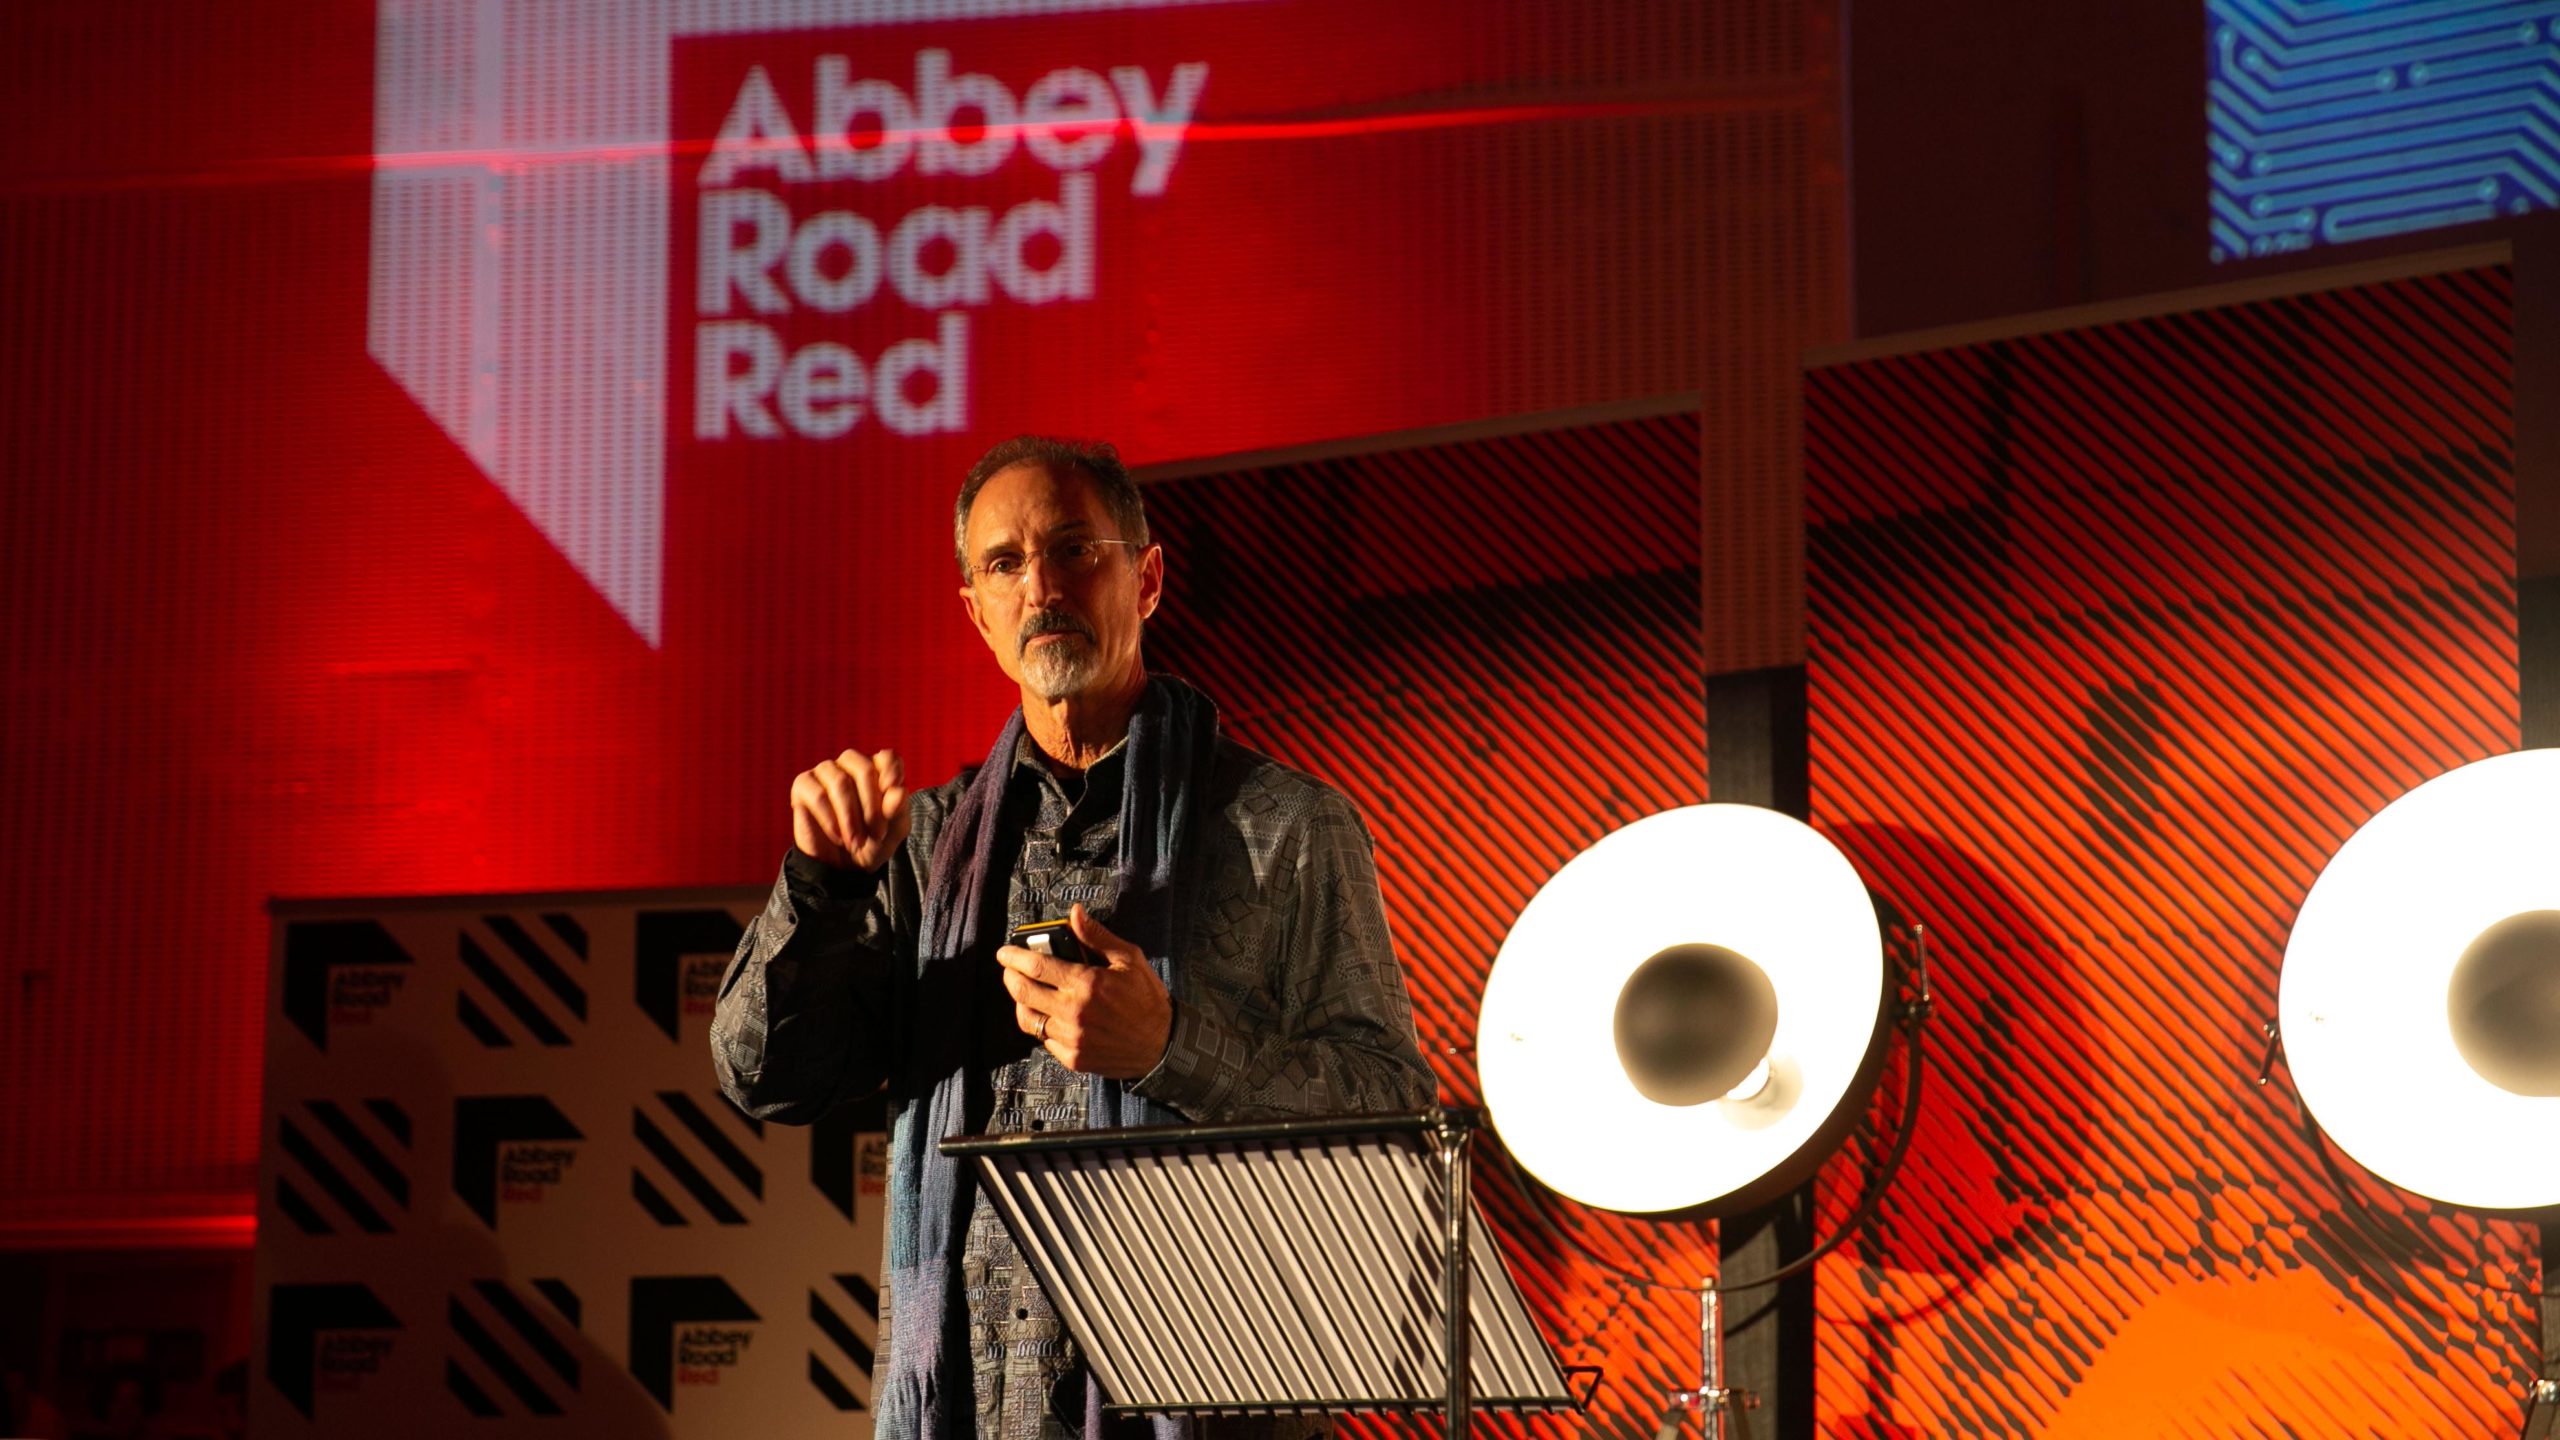 co-founder Tom Gruber's new music LifeScore joins Abbey Road tech incubator - Music Business Worldwide